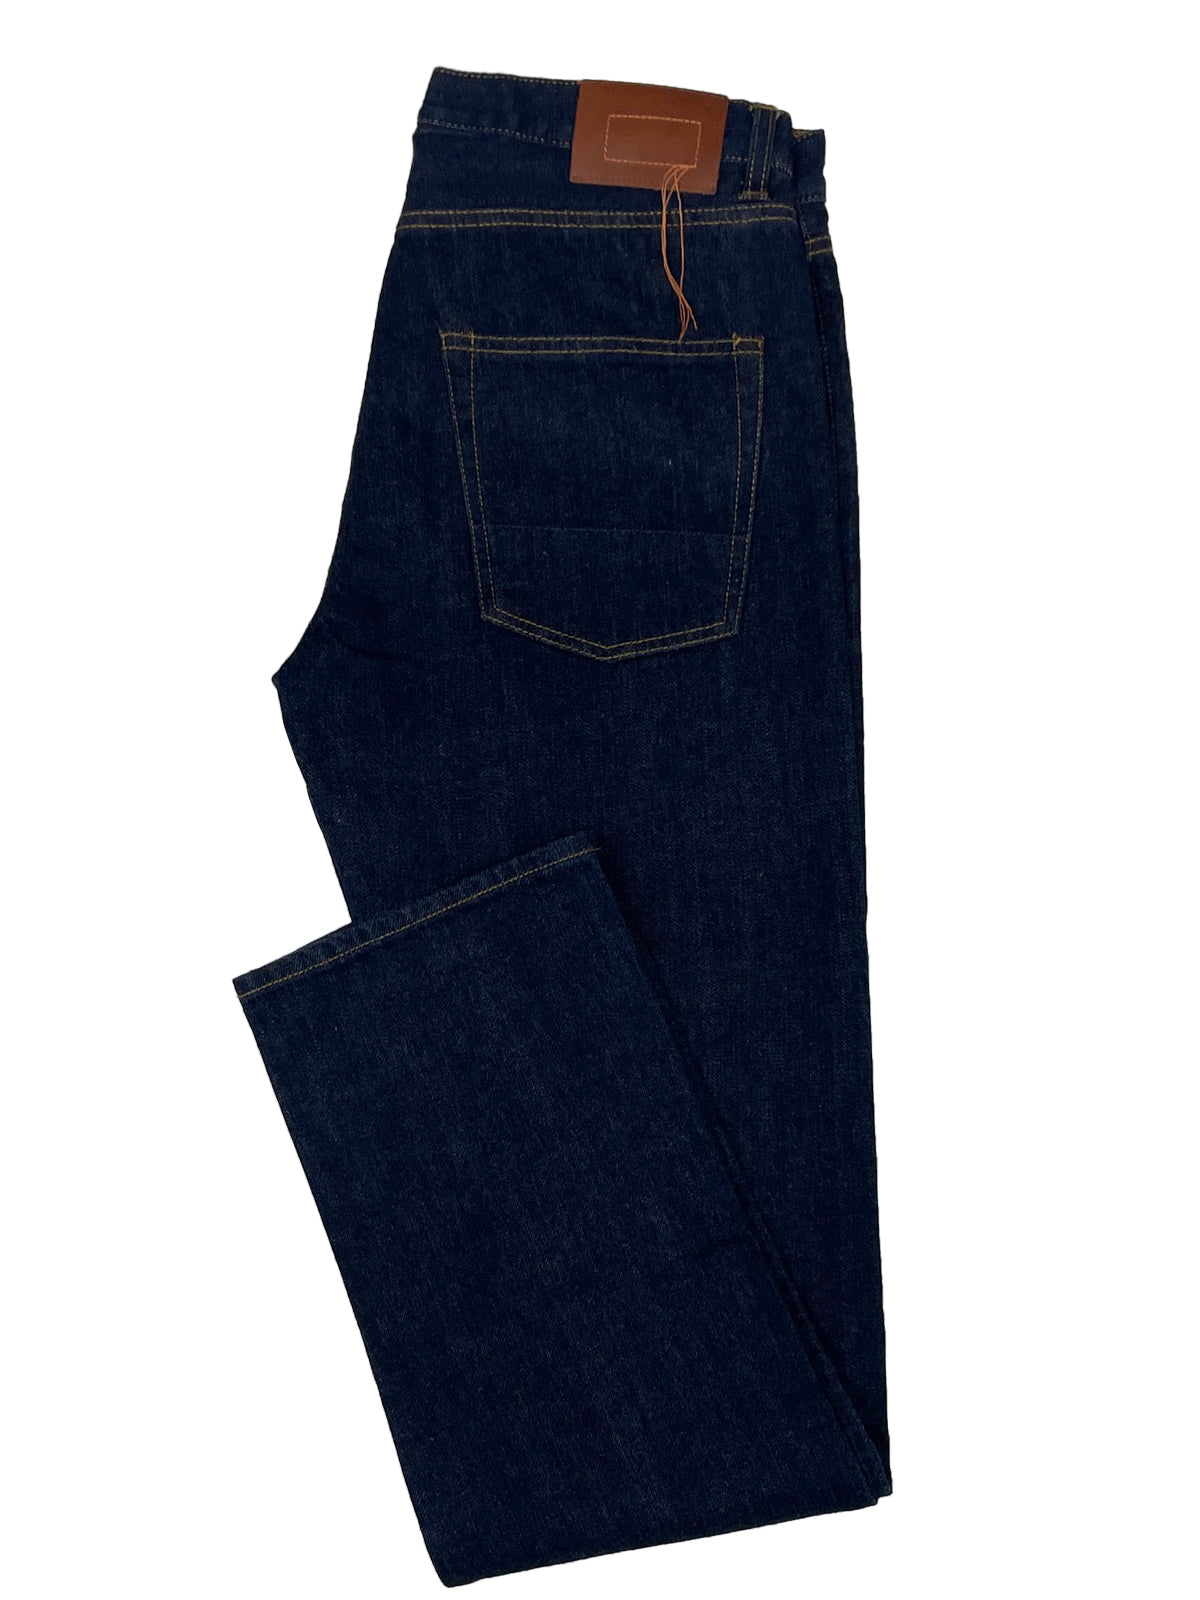 Relaxed Dark Wash Hyper Stretch Jeans | Express